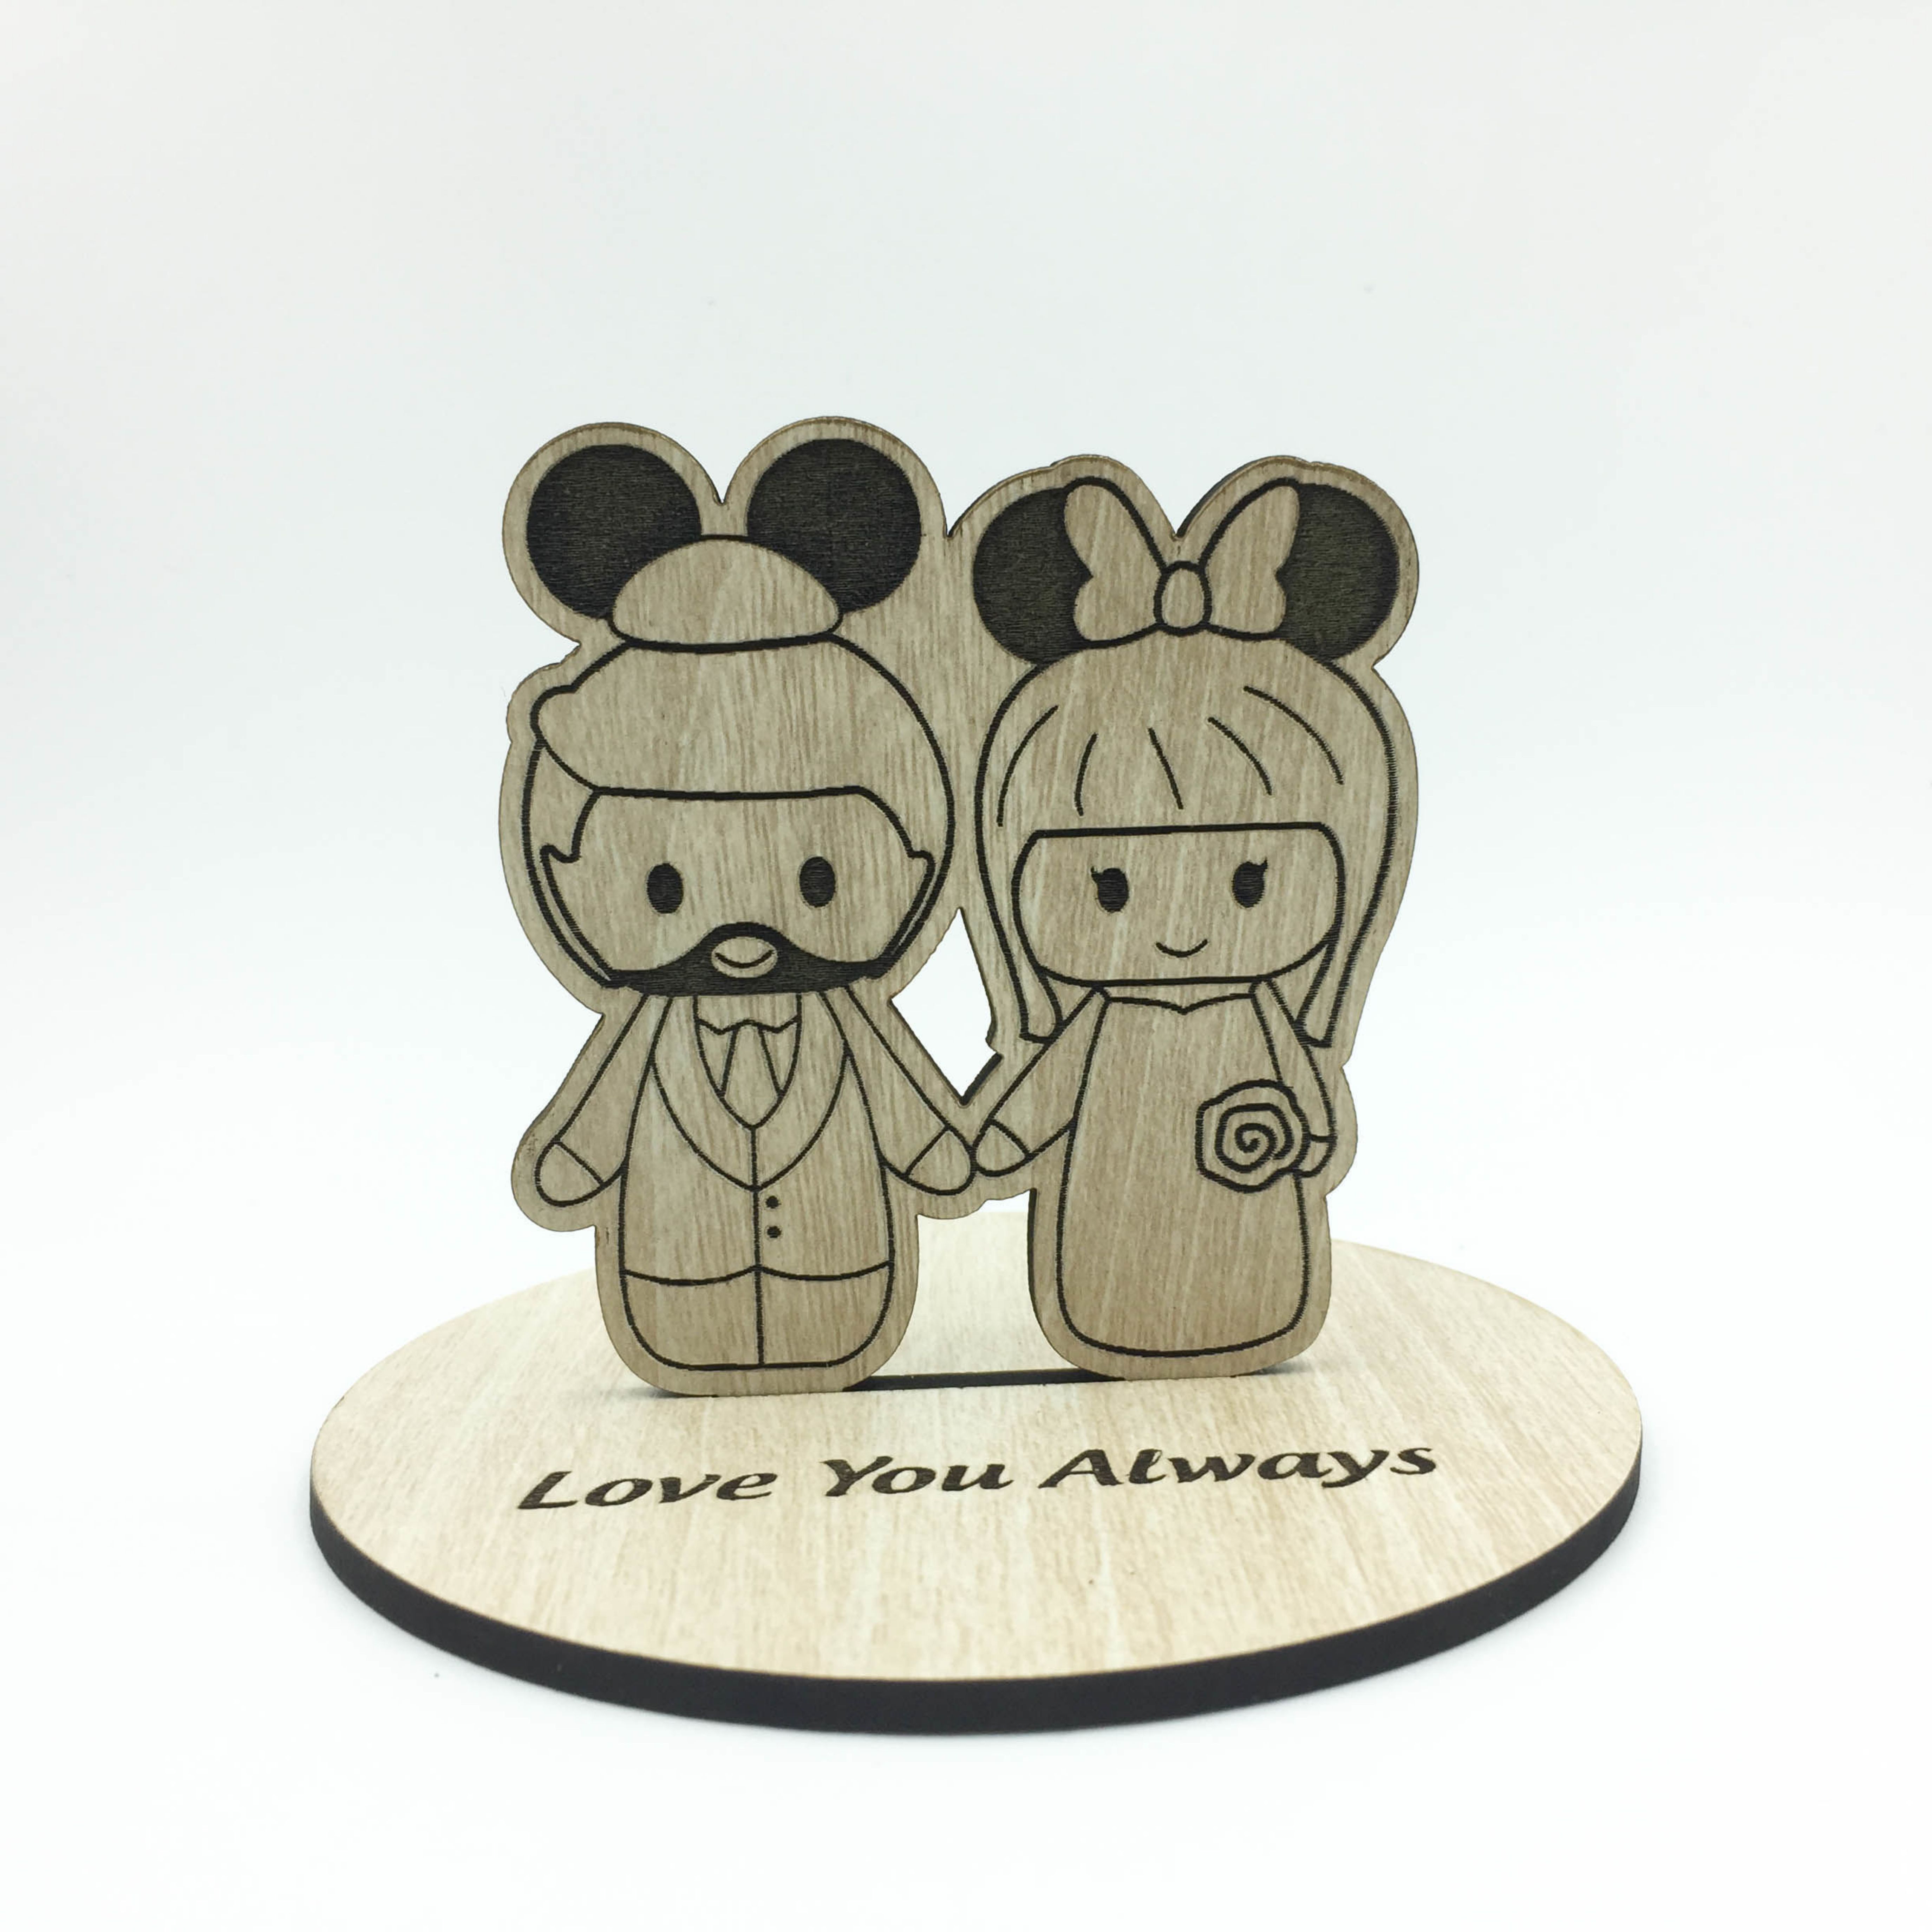 Picture of Mickey and Minnie Wooden Wedding Cake Topper, wood cut out bride & groom standee